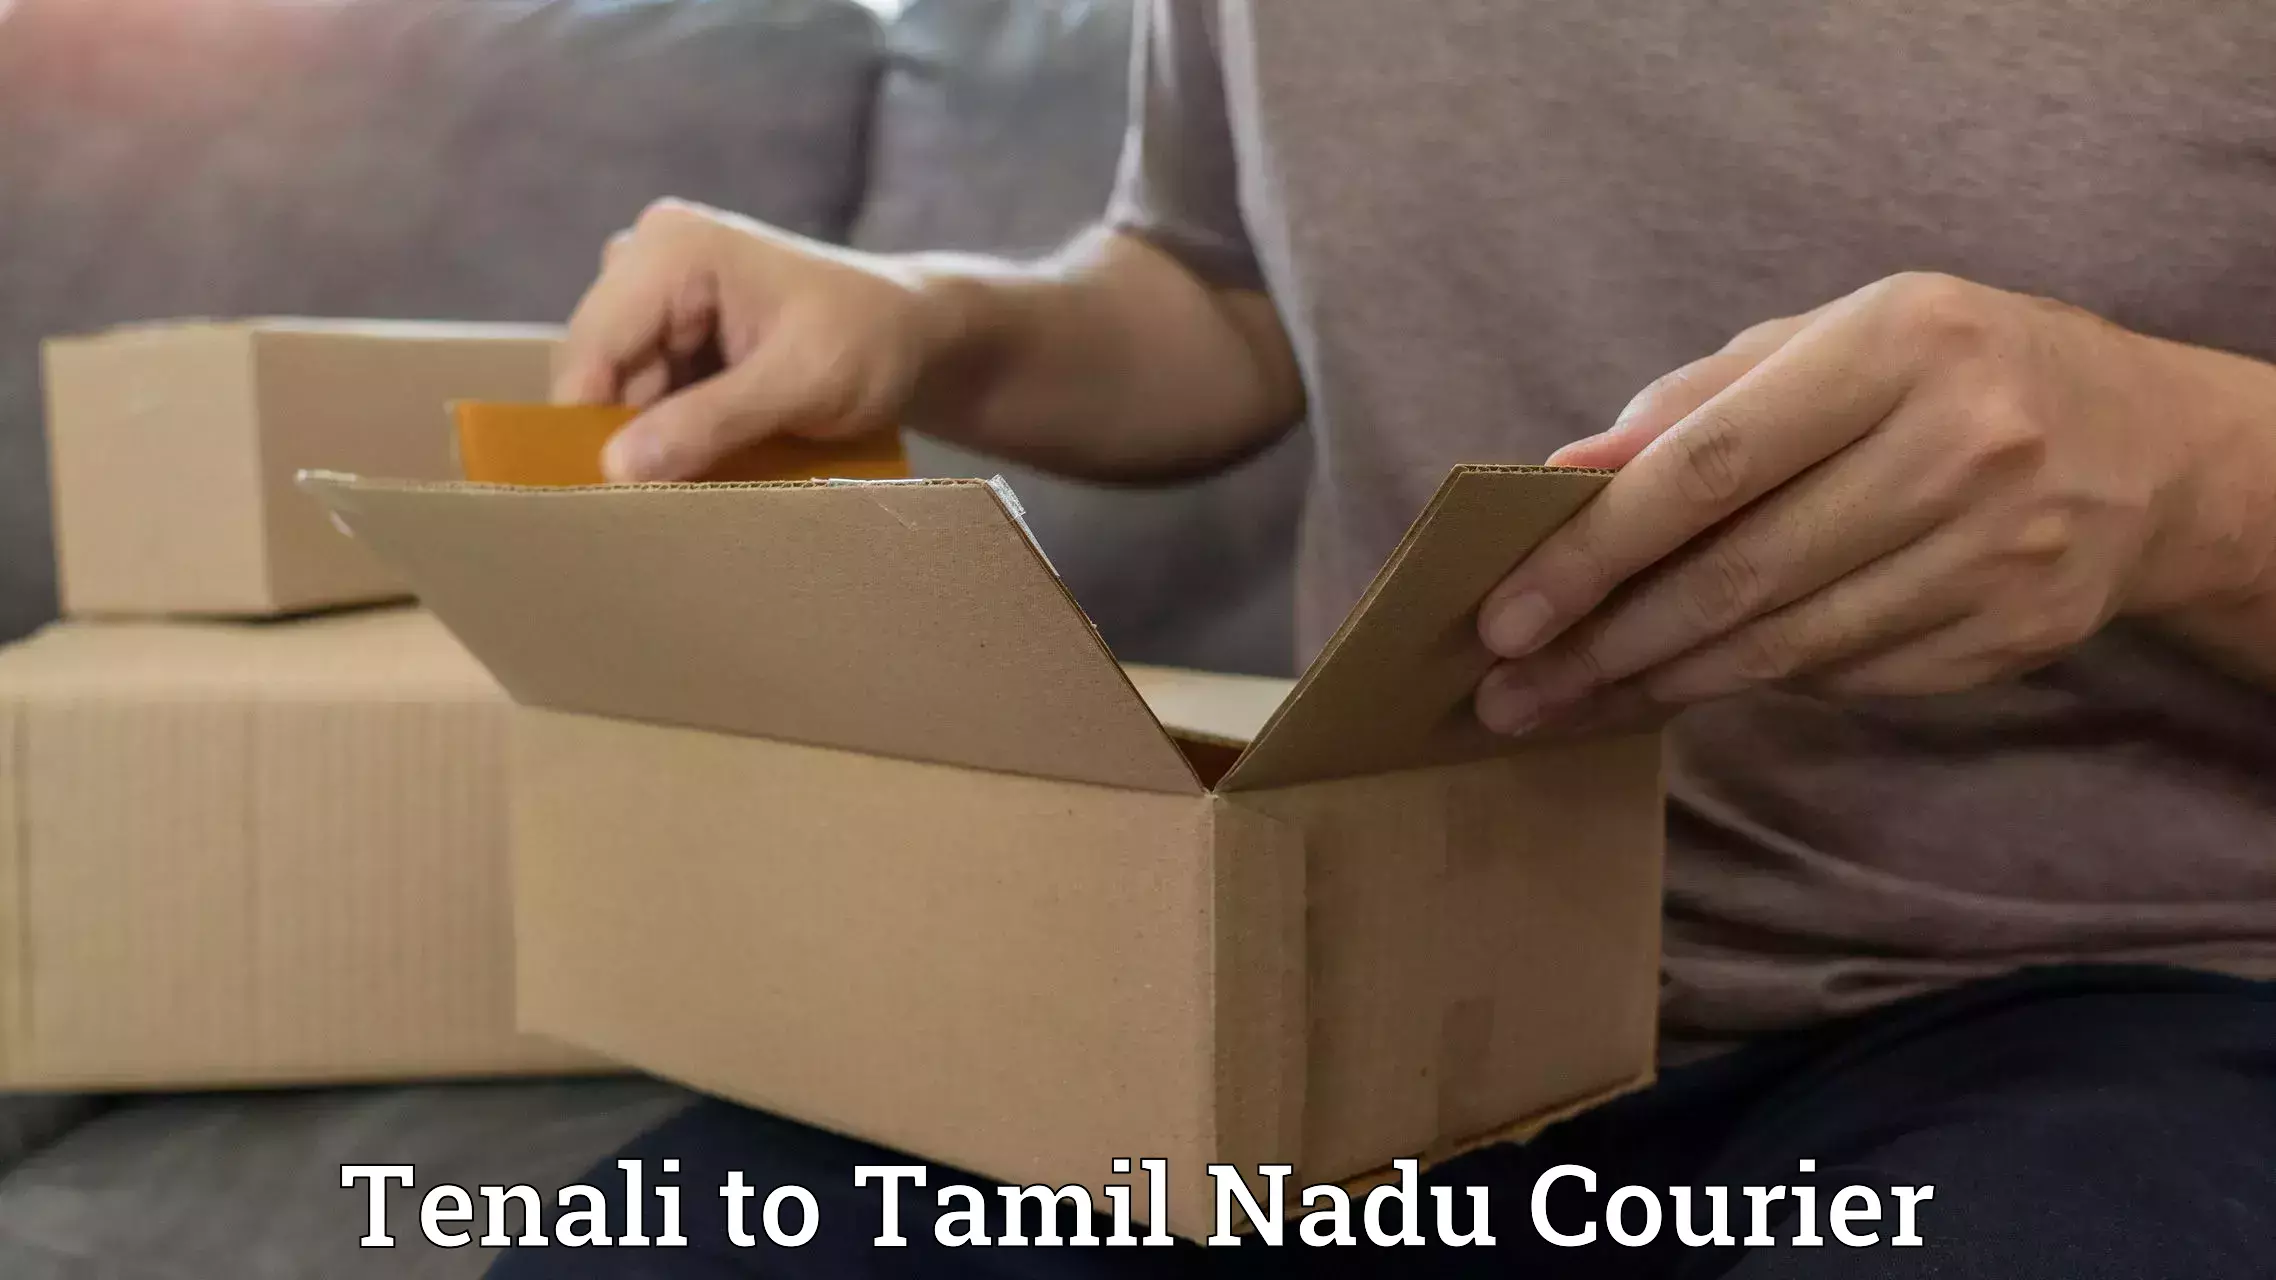 Large-scale shipping solutions Tenali to Tamil Nadu